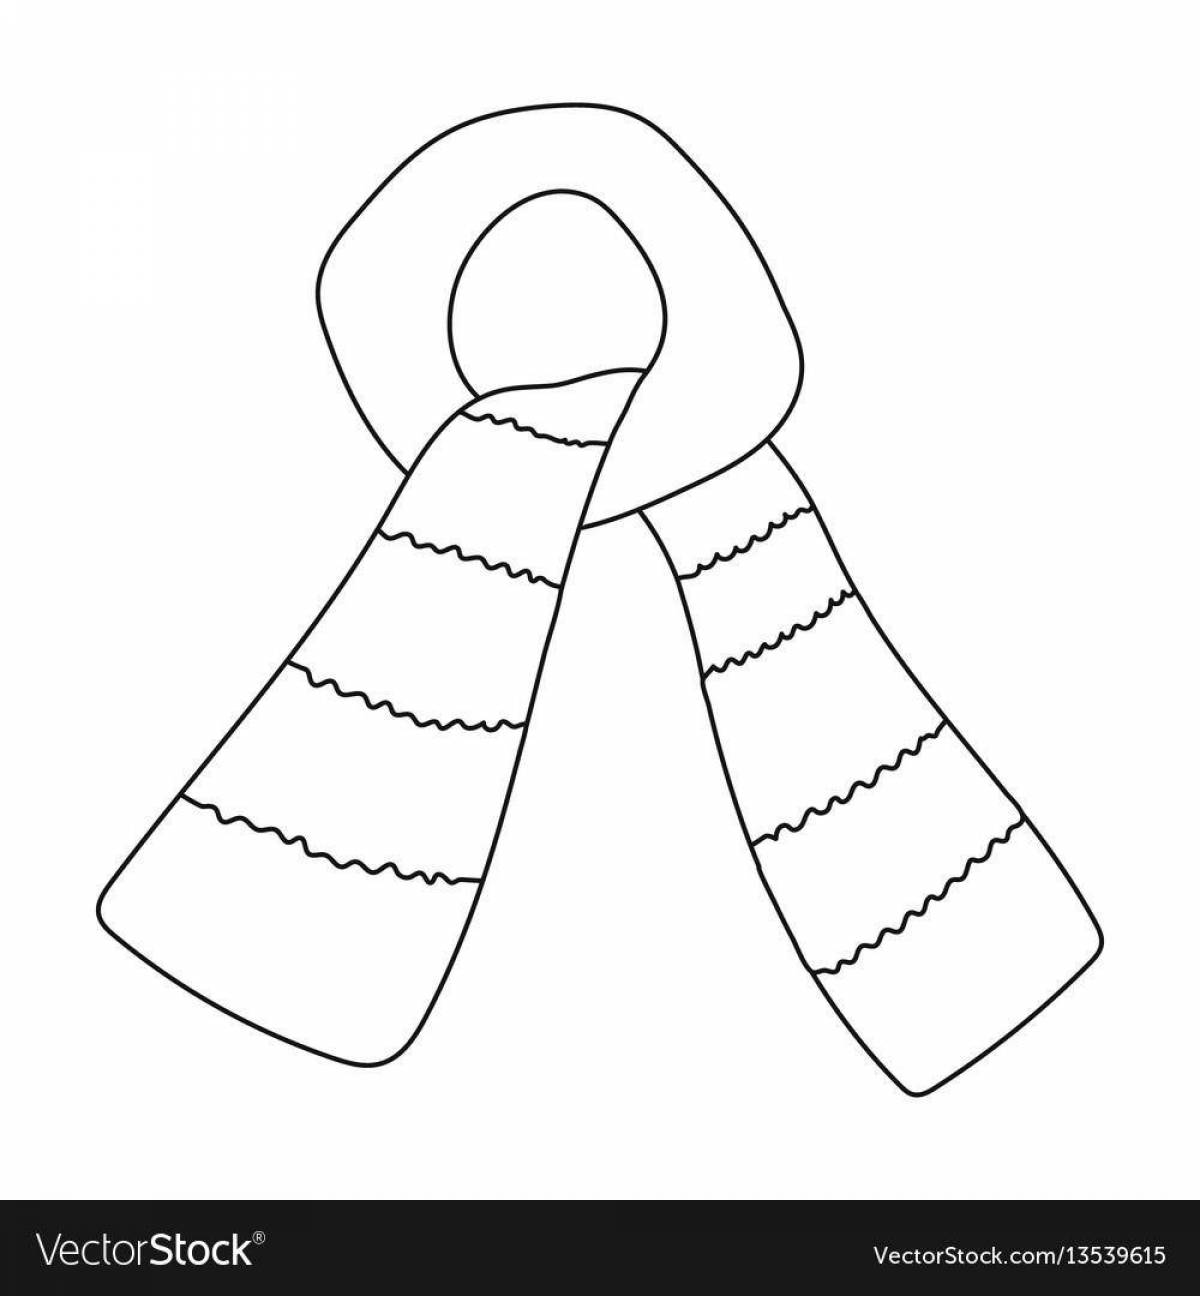 A fun scarf coloring book for 3-4 year olds